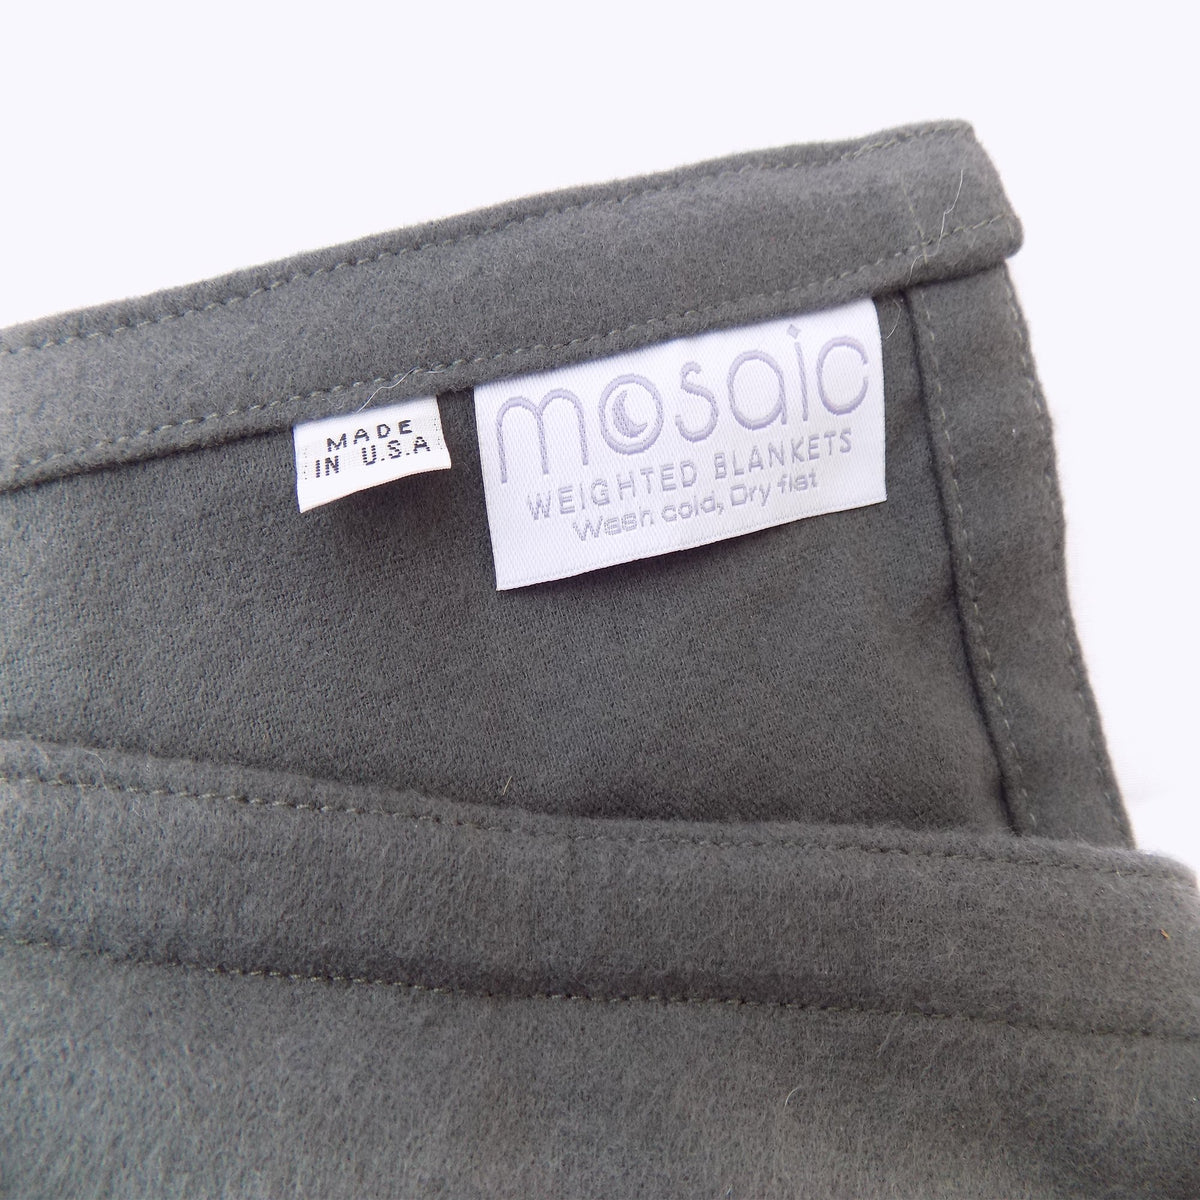 Charcoal Grey Flannel Weighted Blanket is Comfortable and Cozy - Mosaic ...